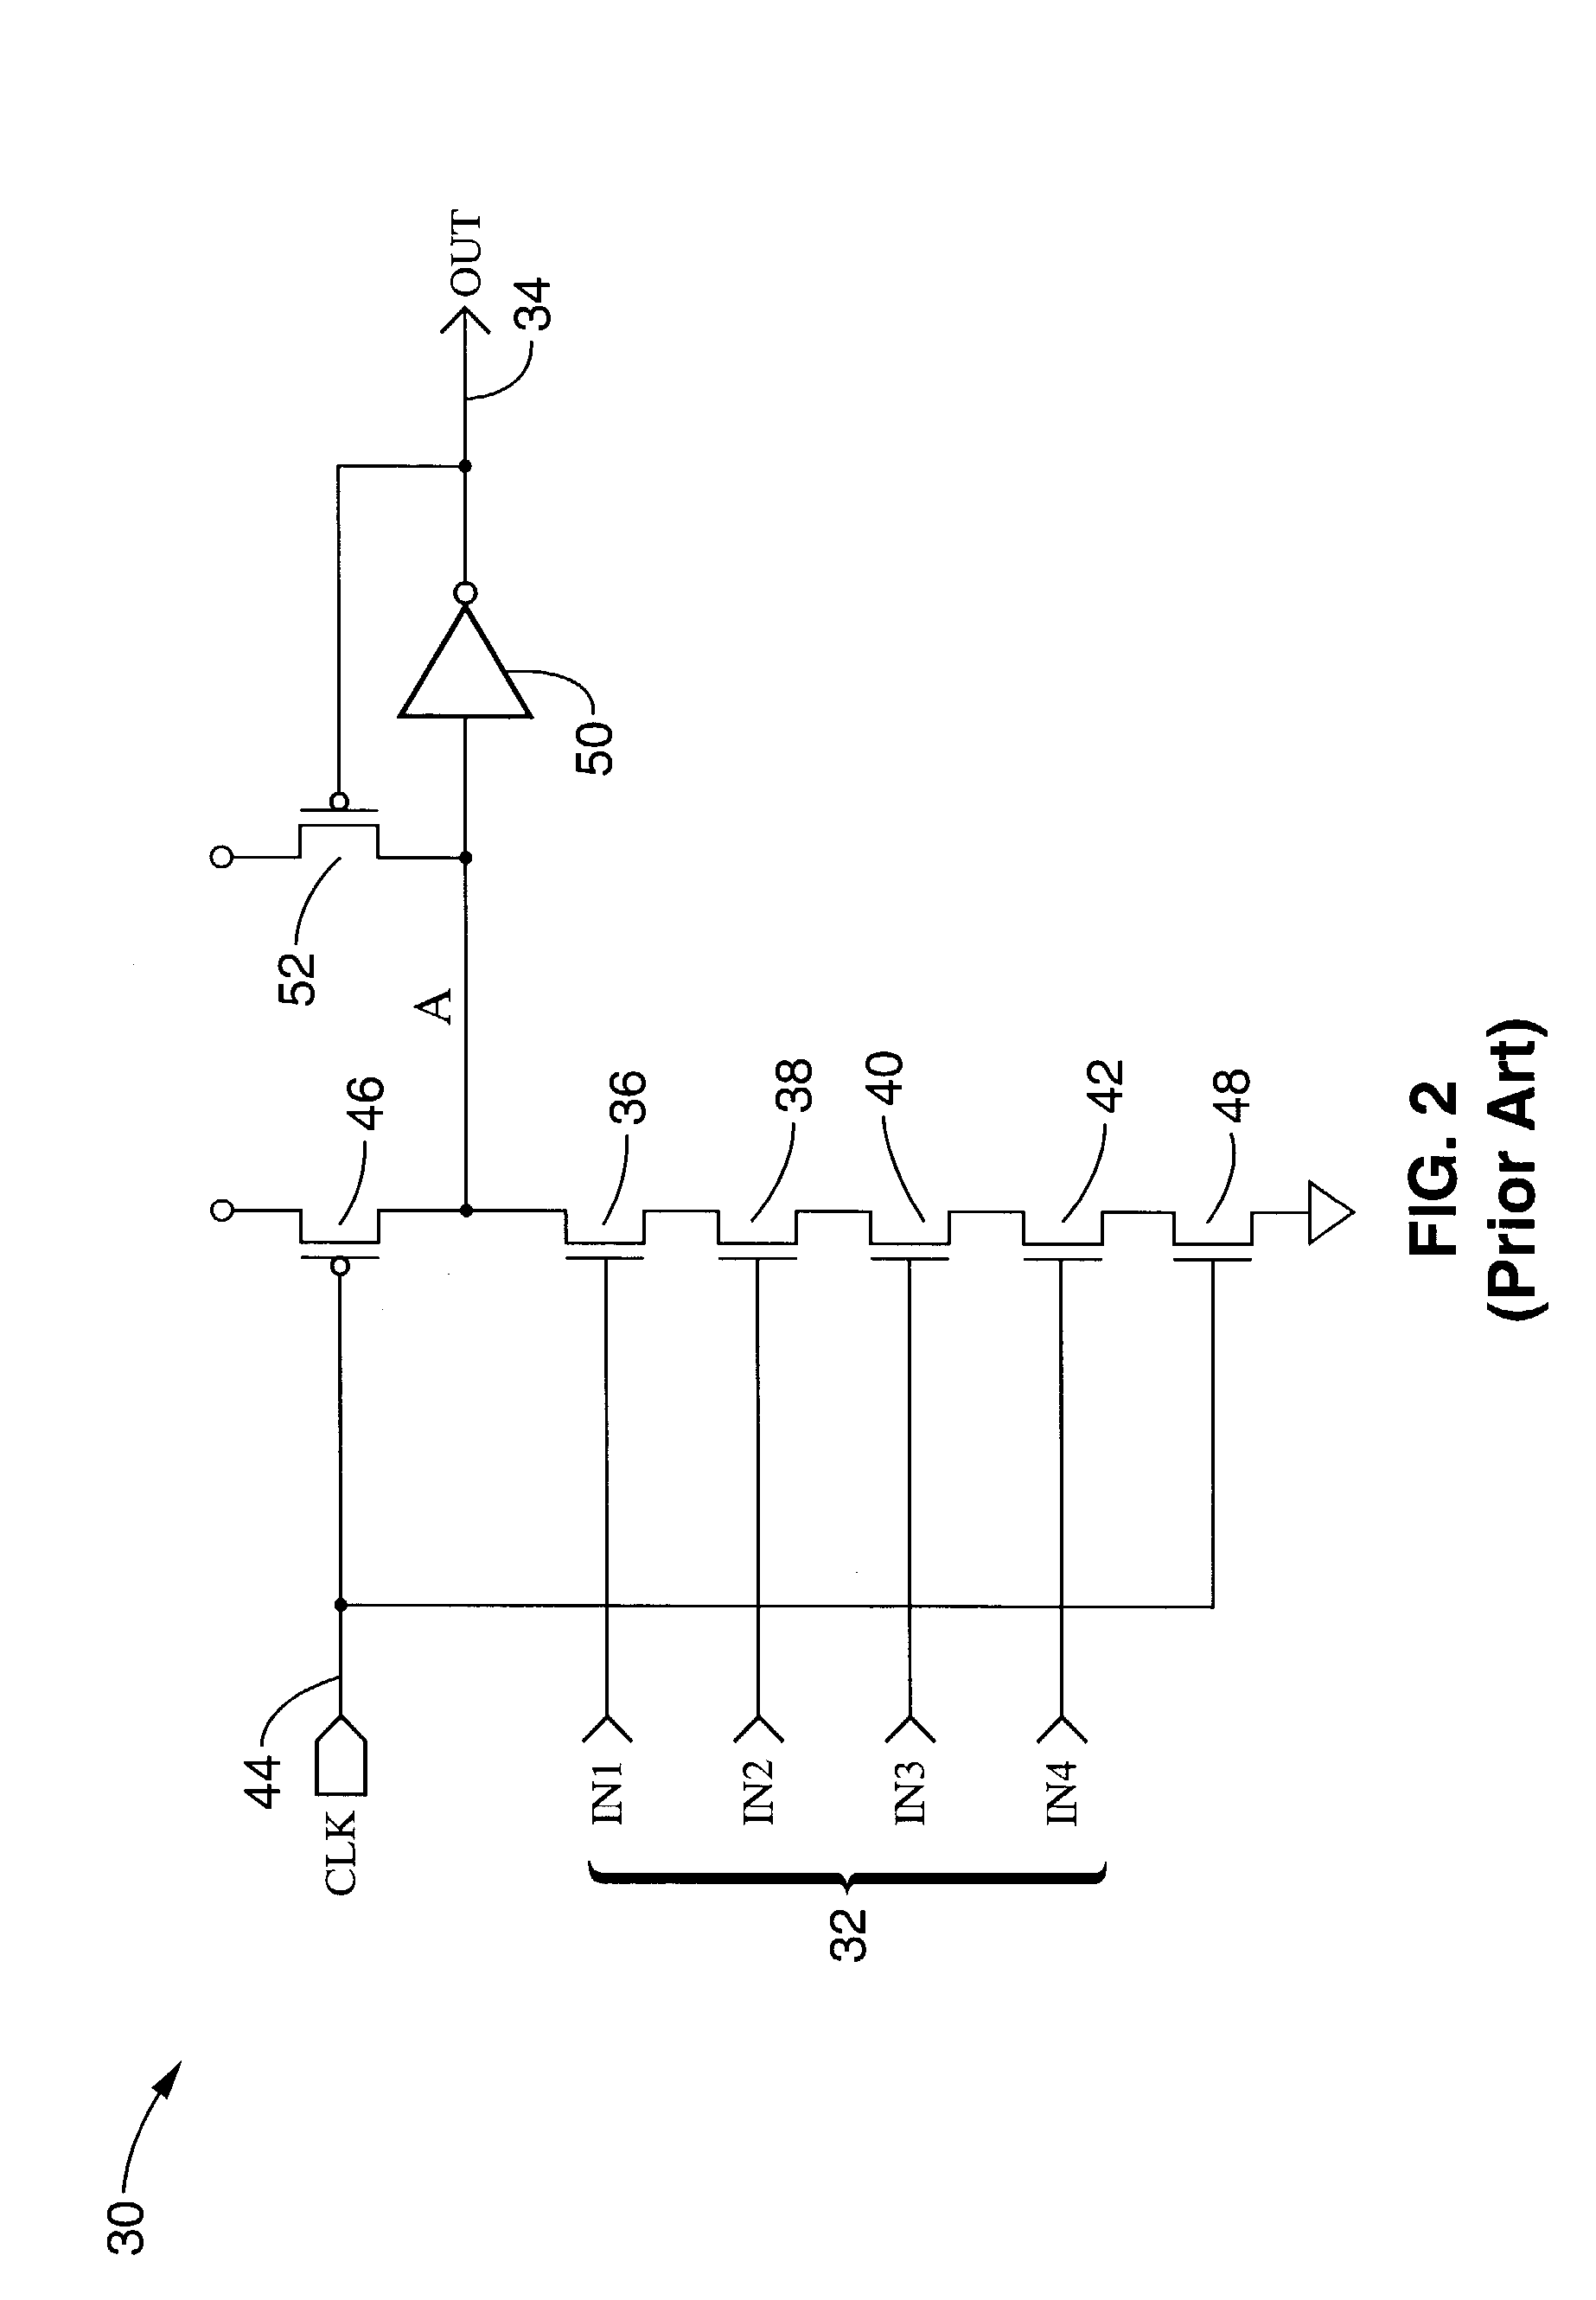 Event driven dynamic logic for reducing power consumption